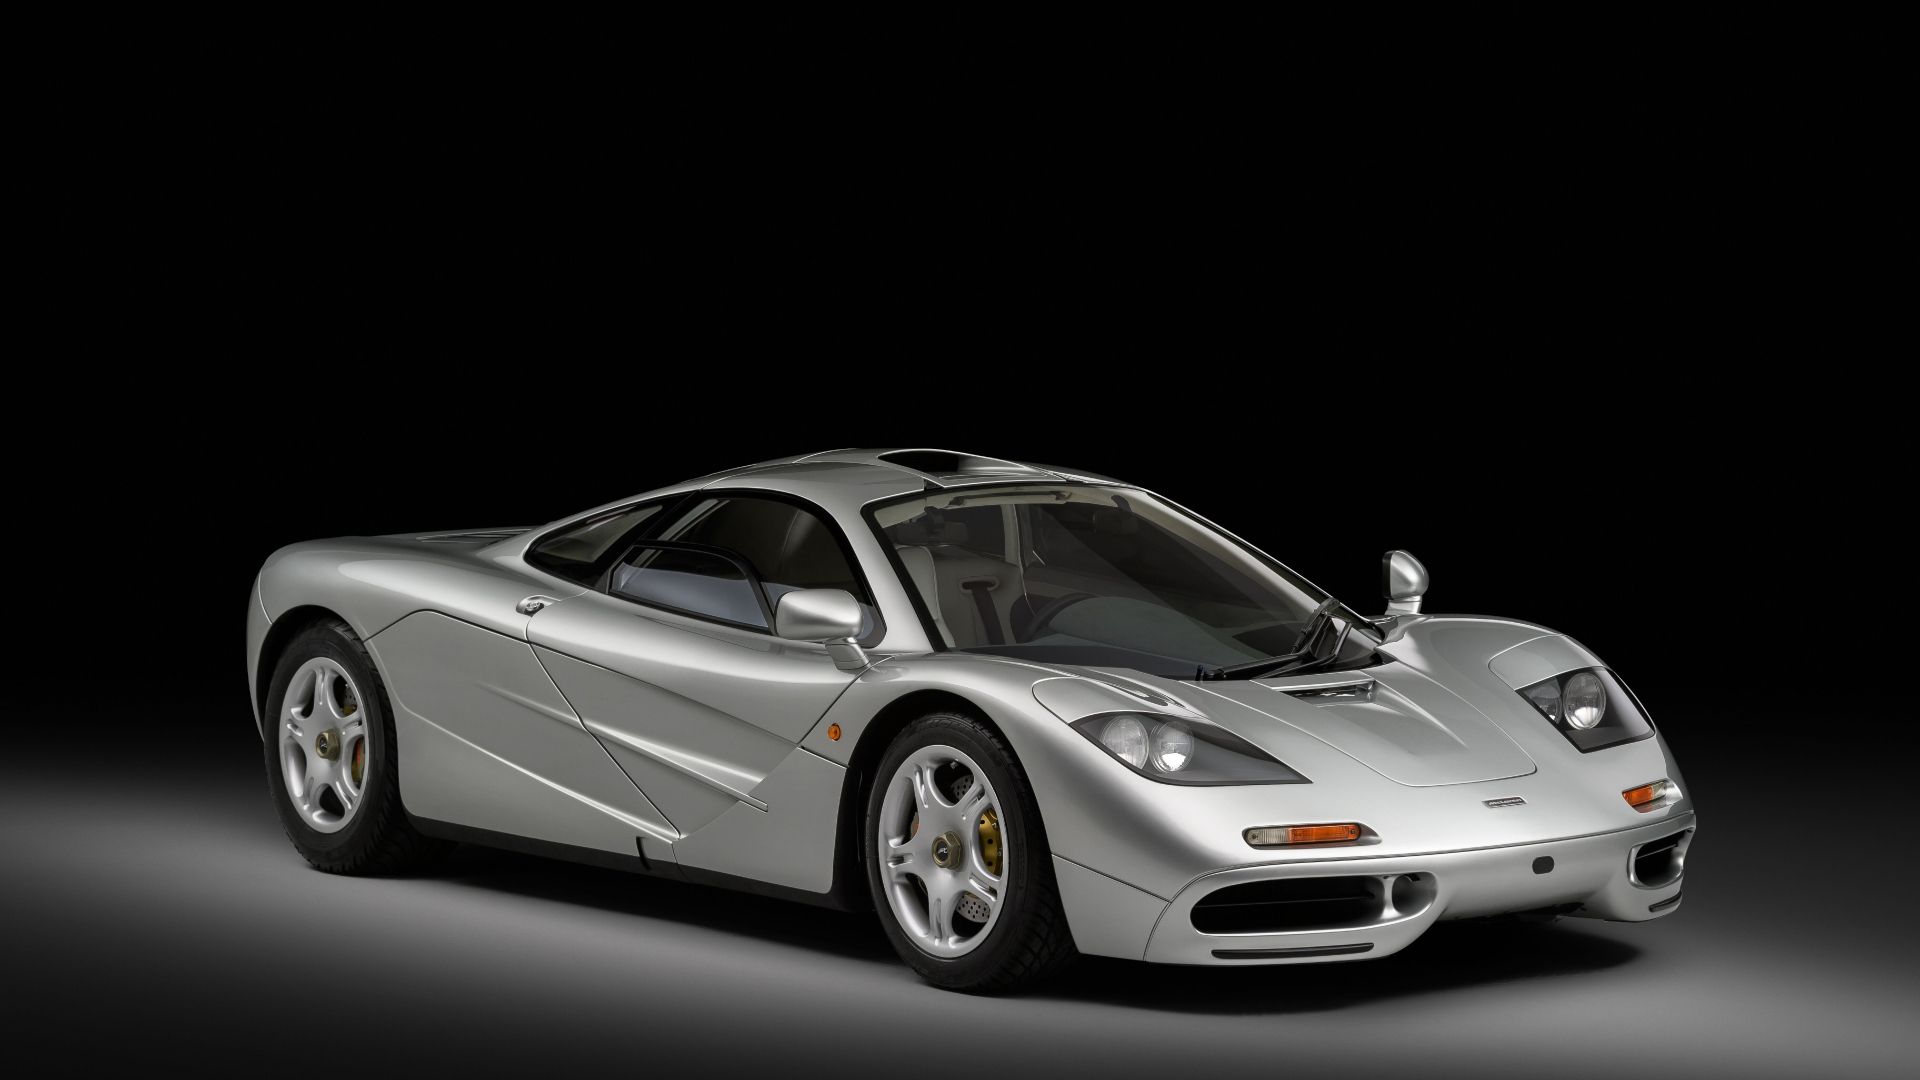 Here's What Makes The Gordon Murray T.50 A True Successor To The McLaren F1